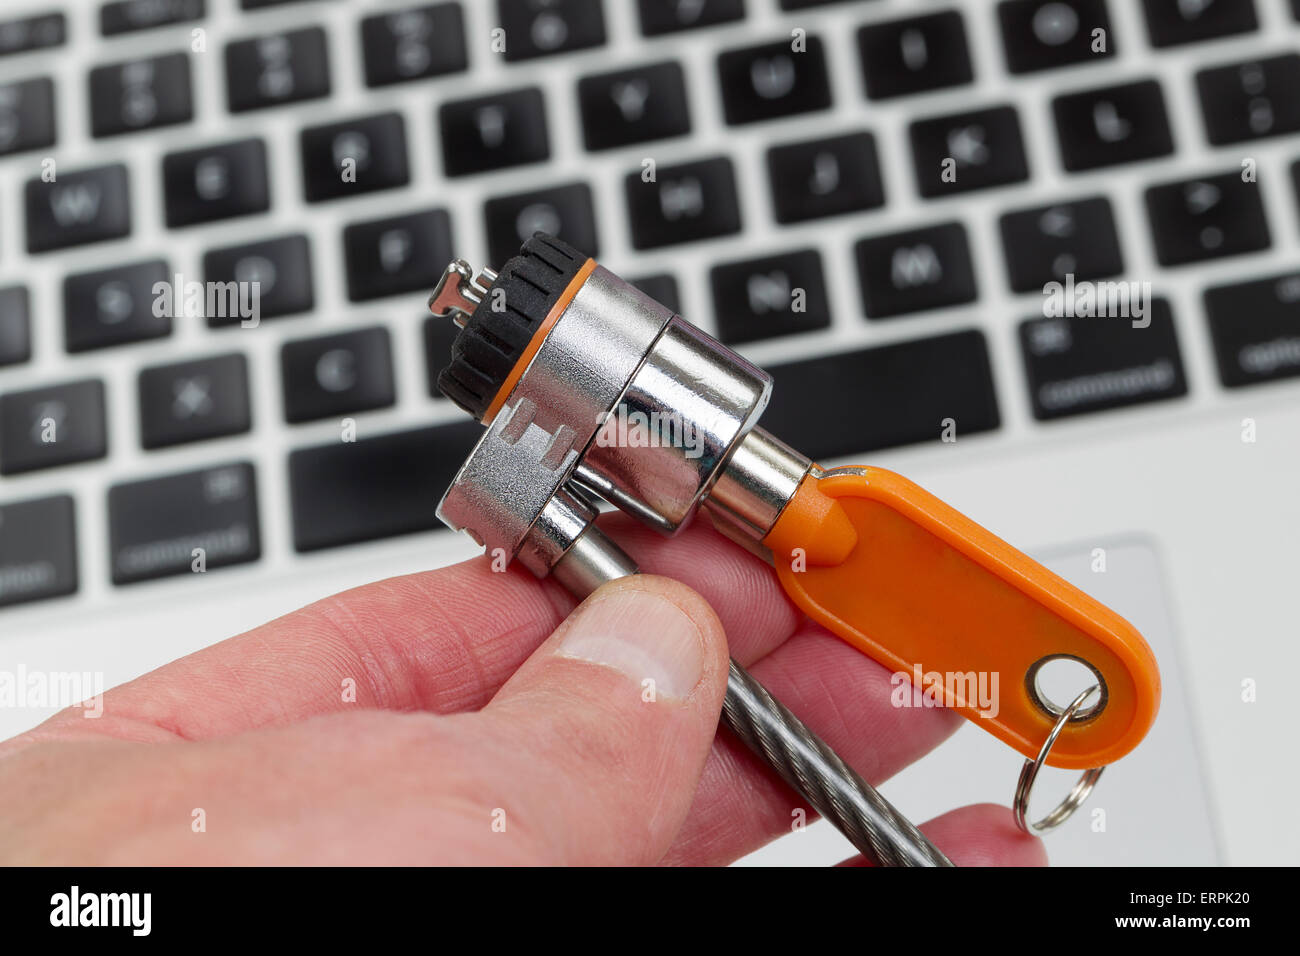 Close up of hand, focus on locking device, holding computer lock with keyboard in background. Stock Photo